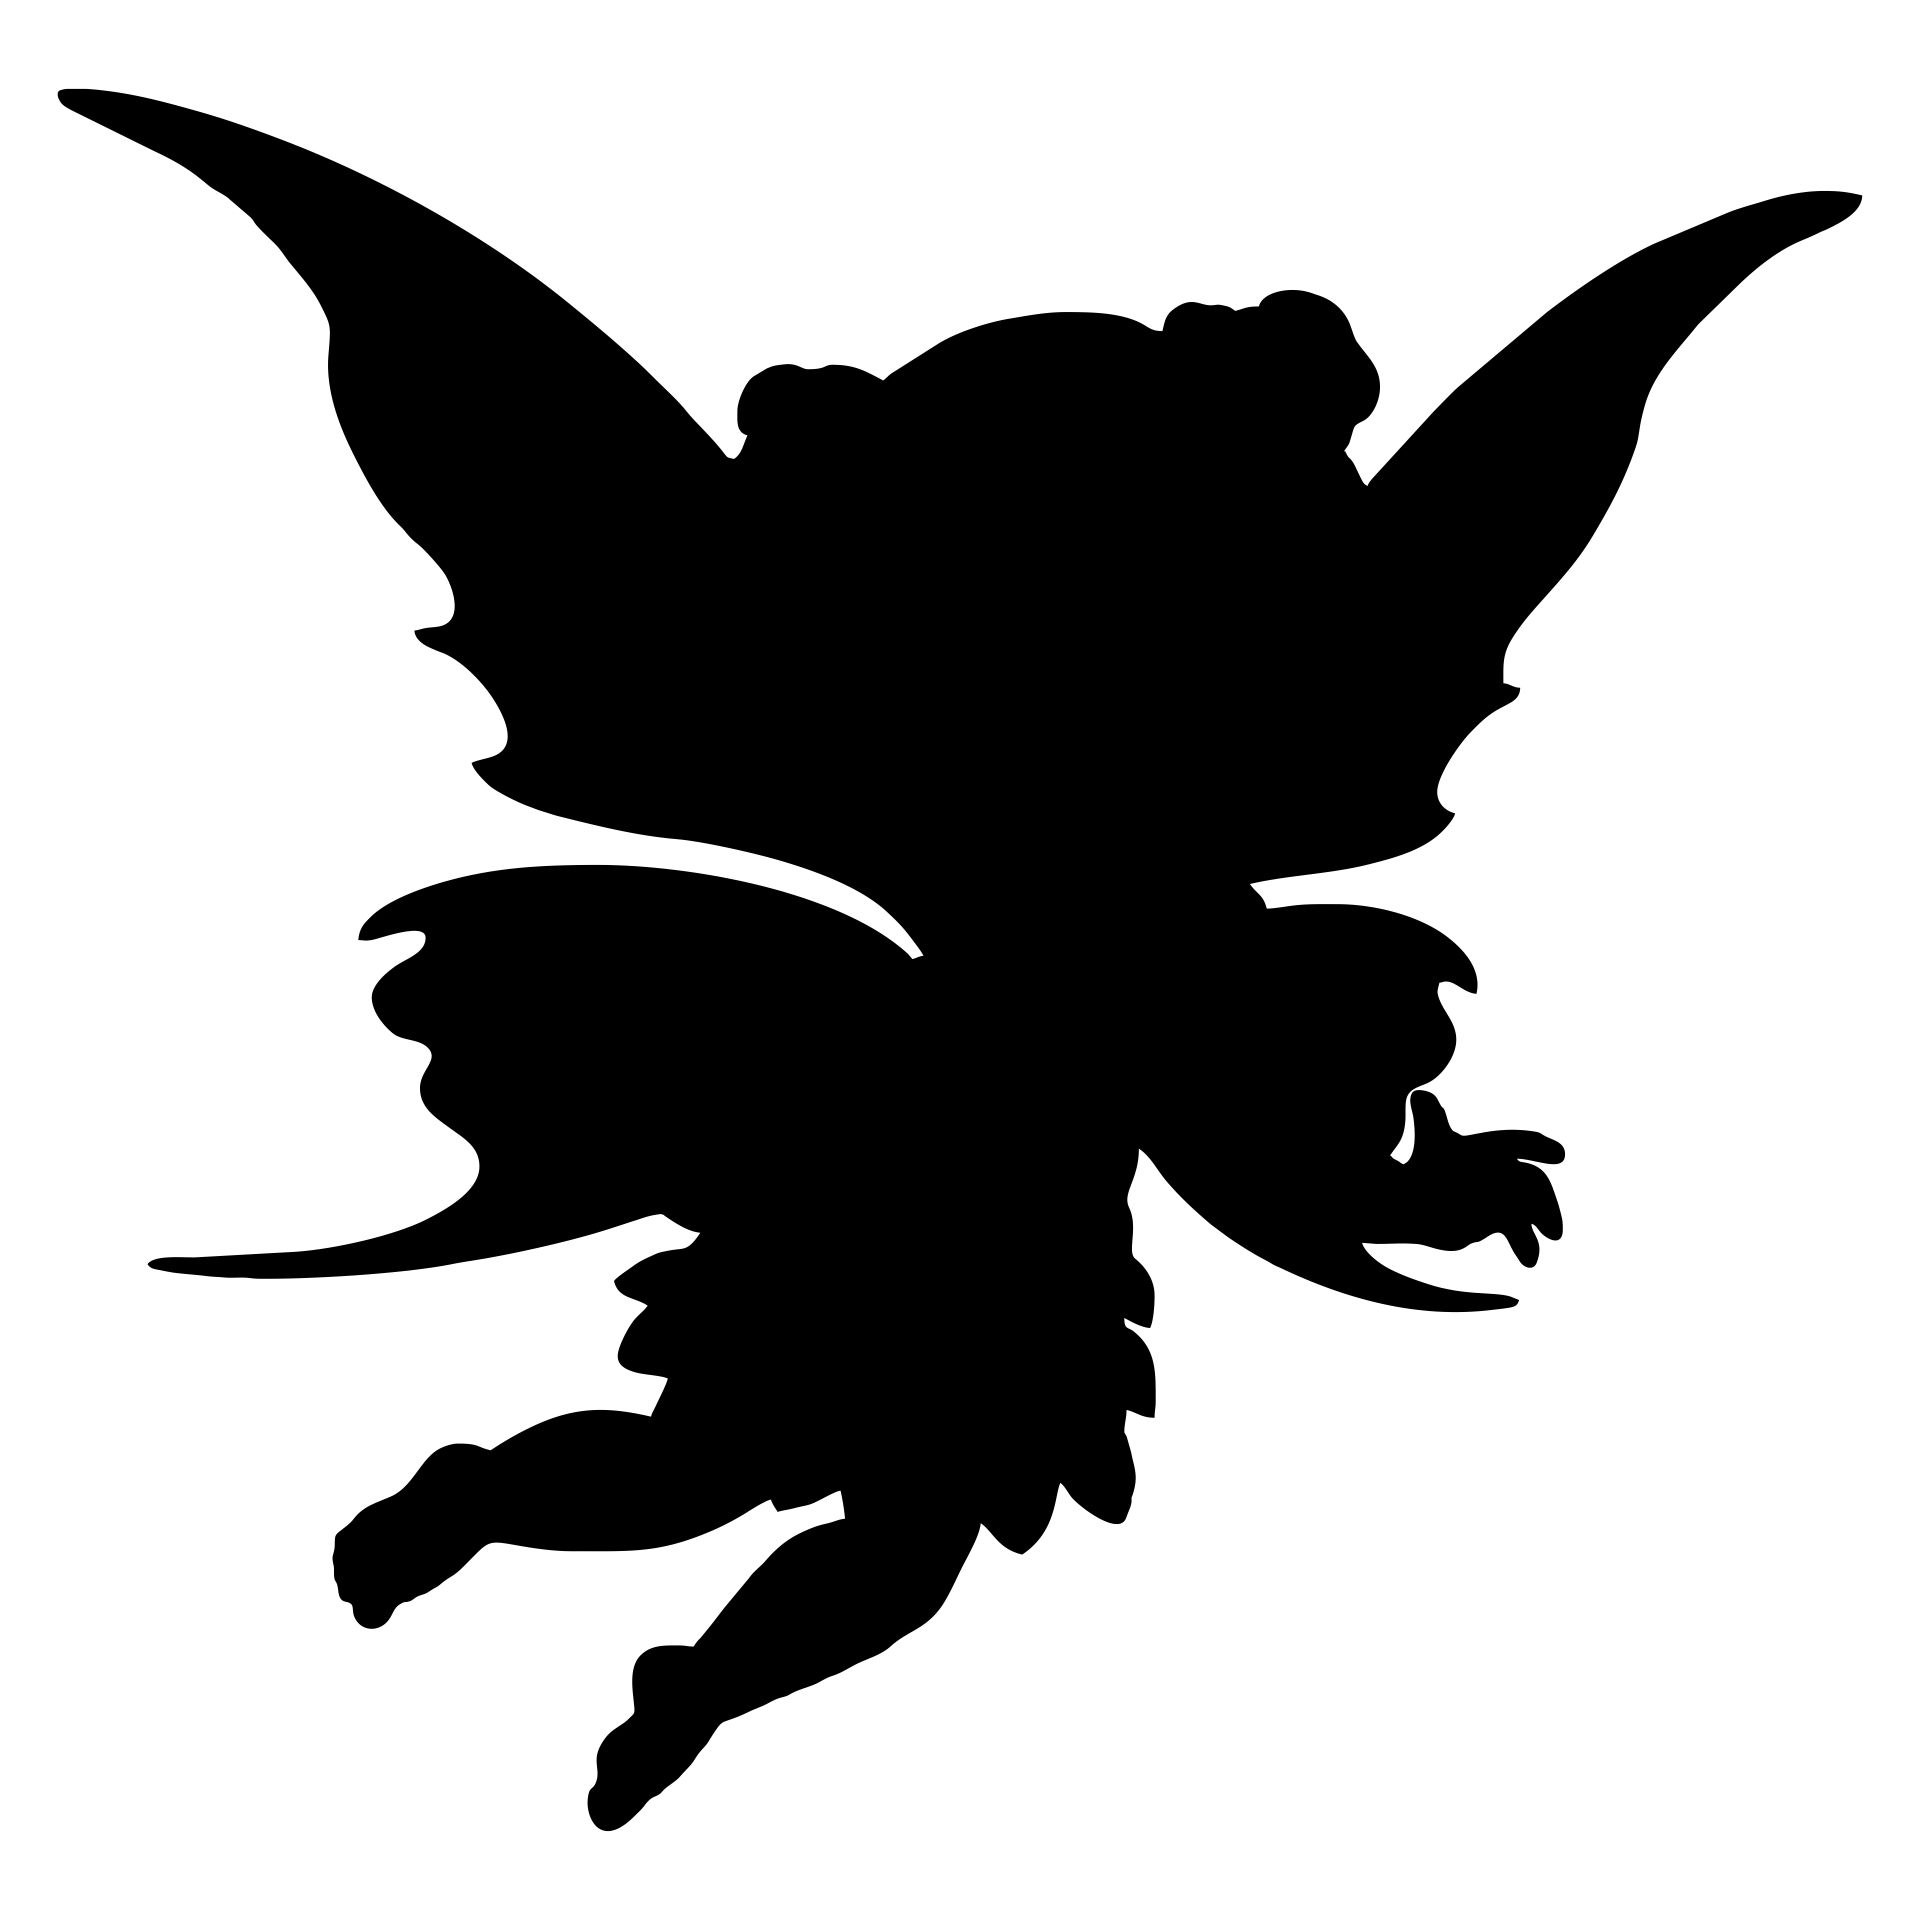 9 Best Images of Printable Fairy Silhouette Free Fairy Silhouette